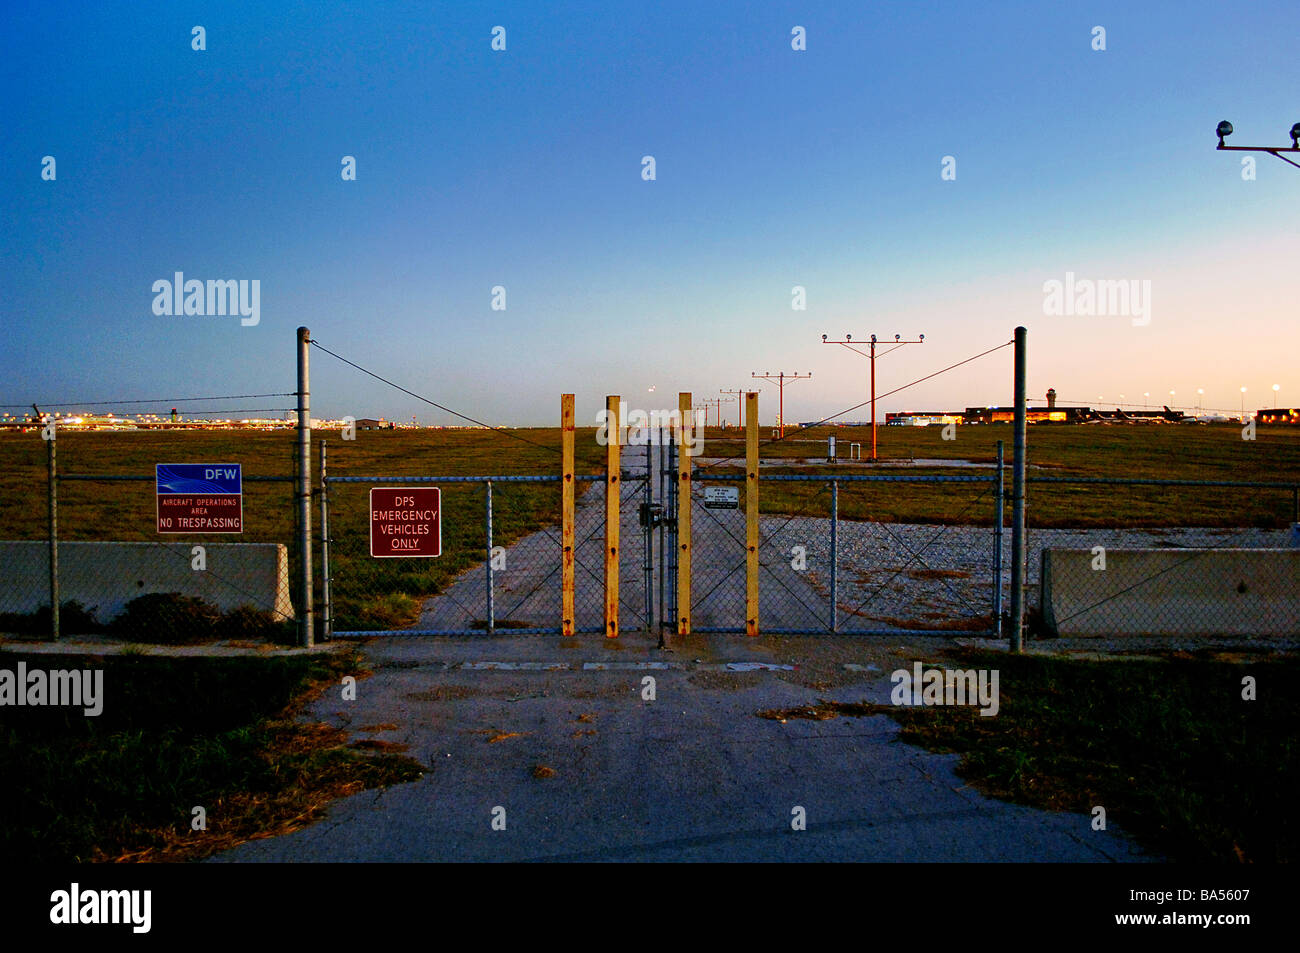 Security gate and runway lights at major international airport, DFW international Stock Photo